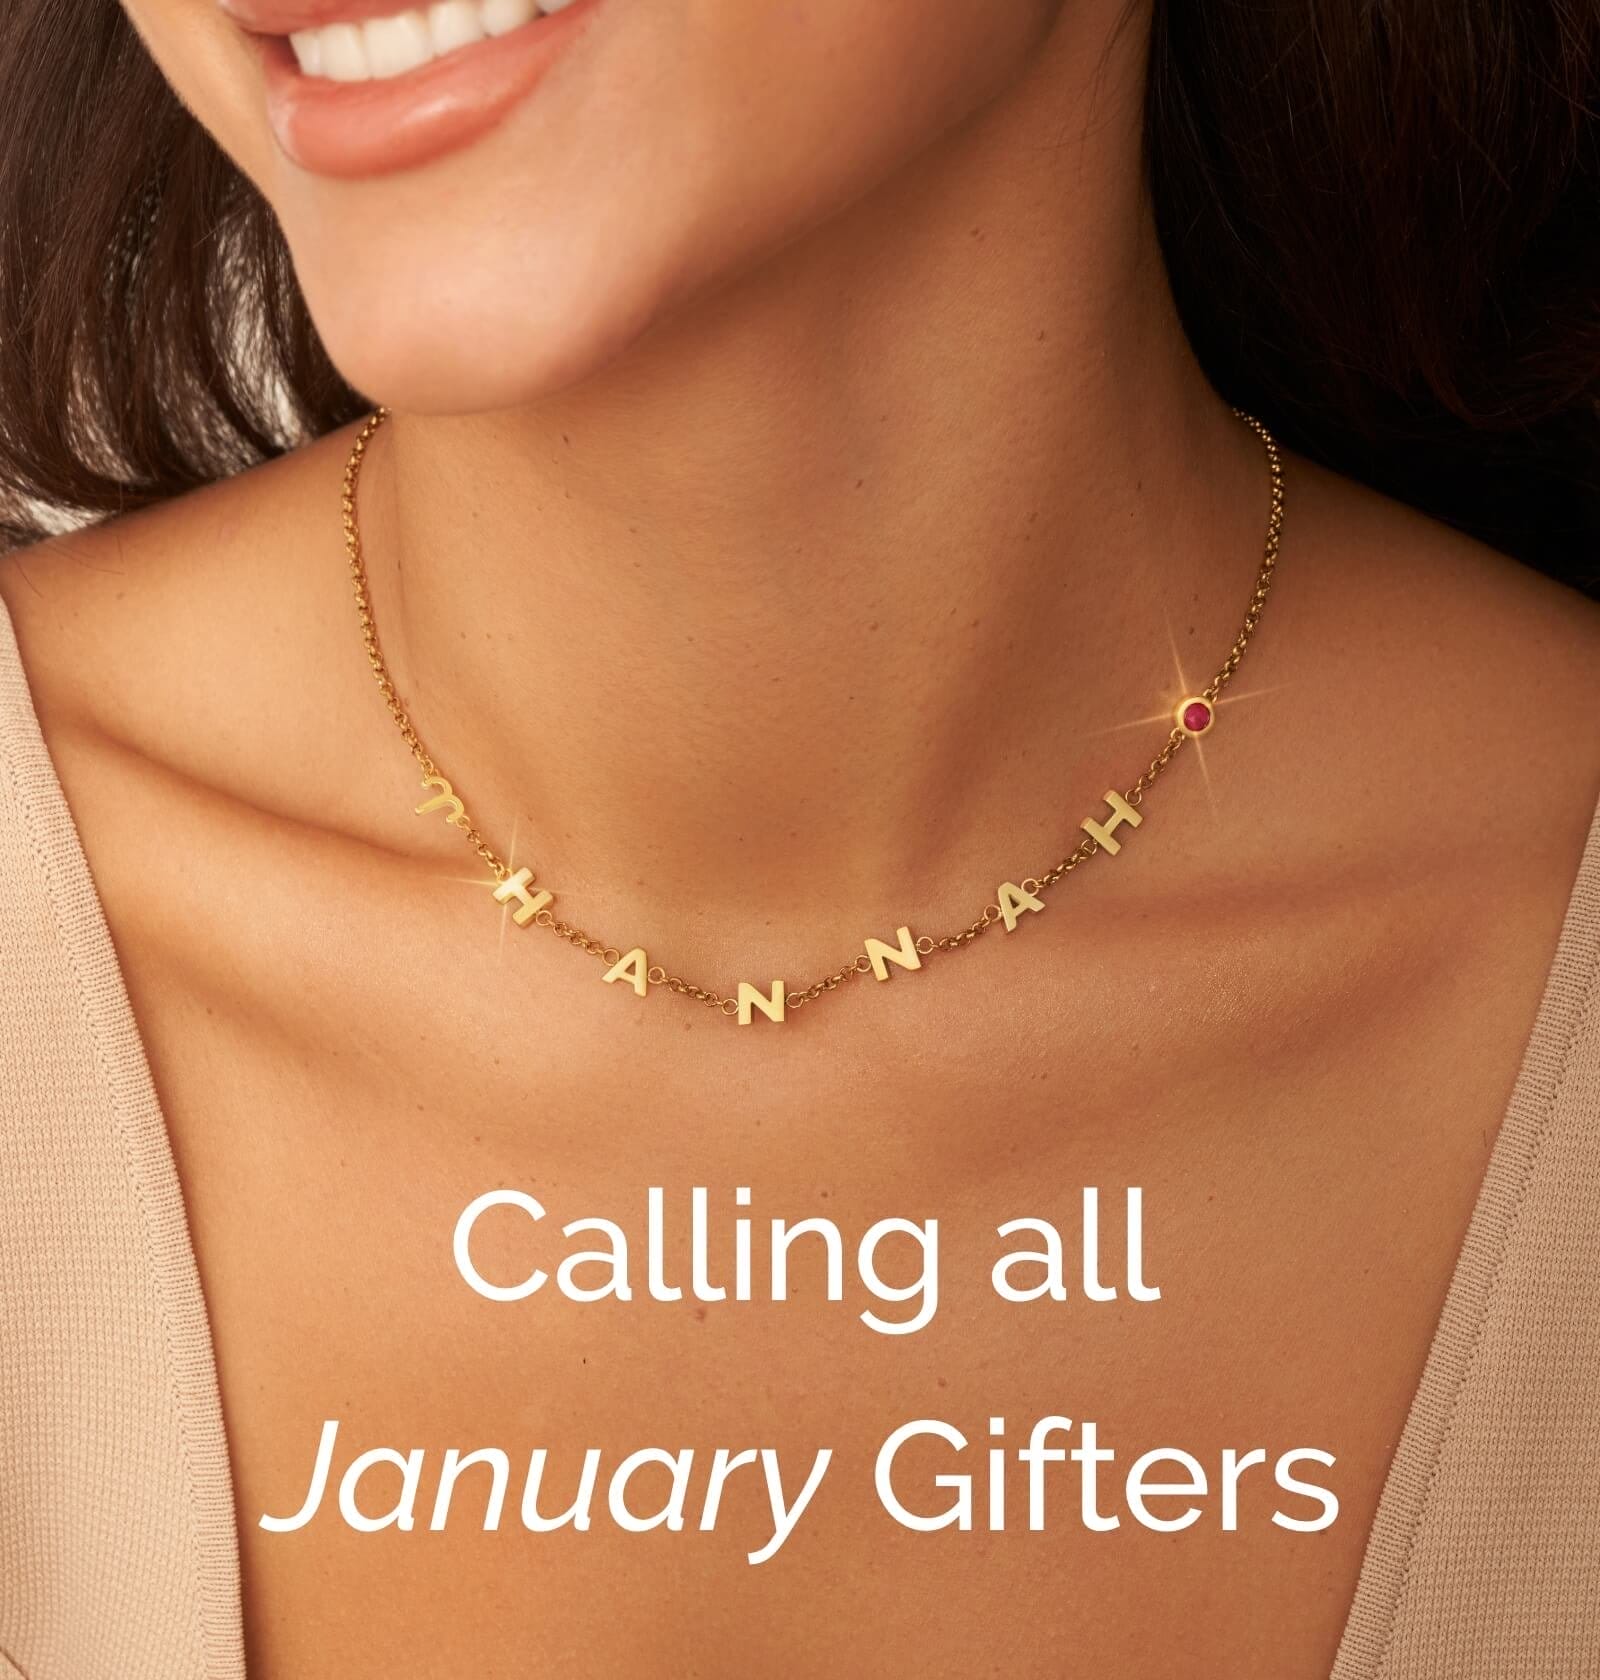 Calling all January Gifters